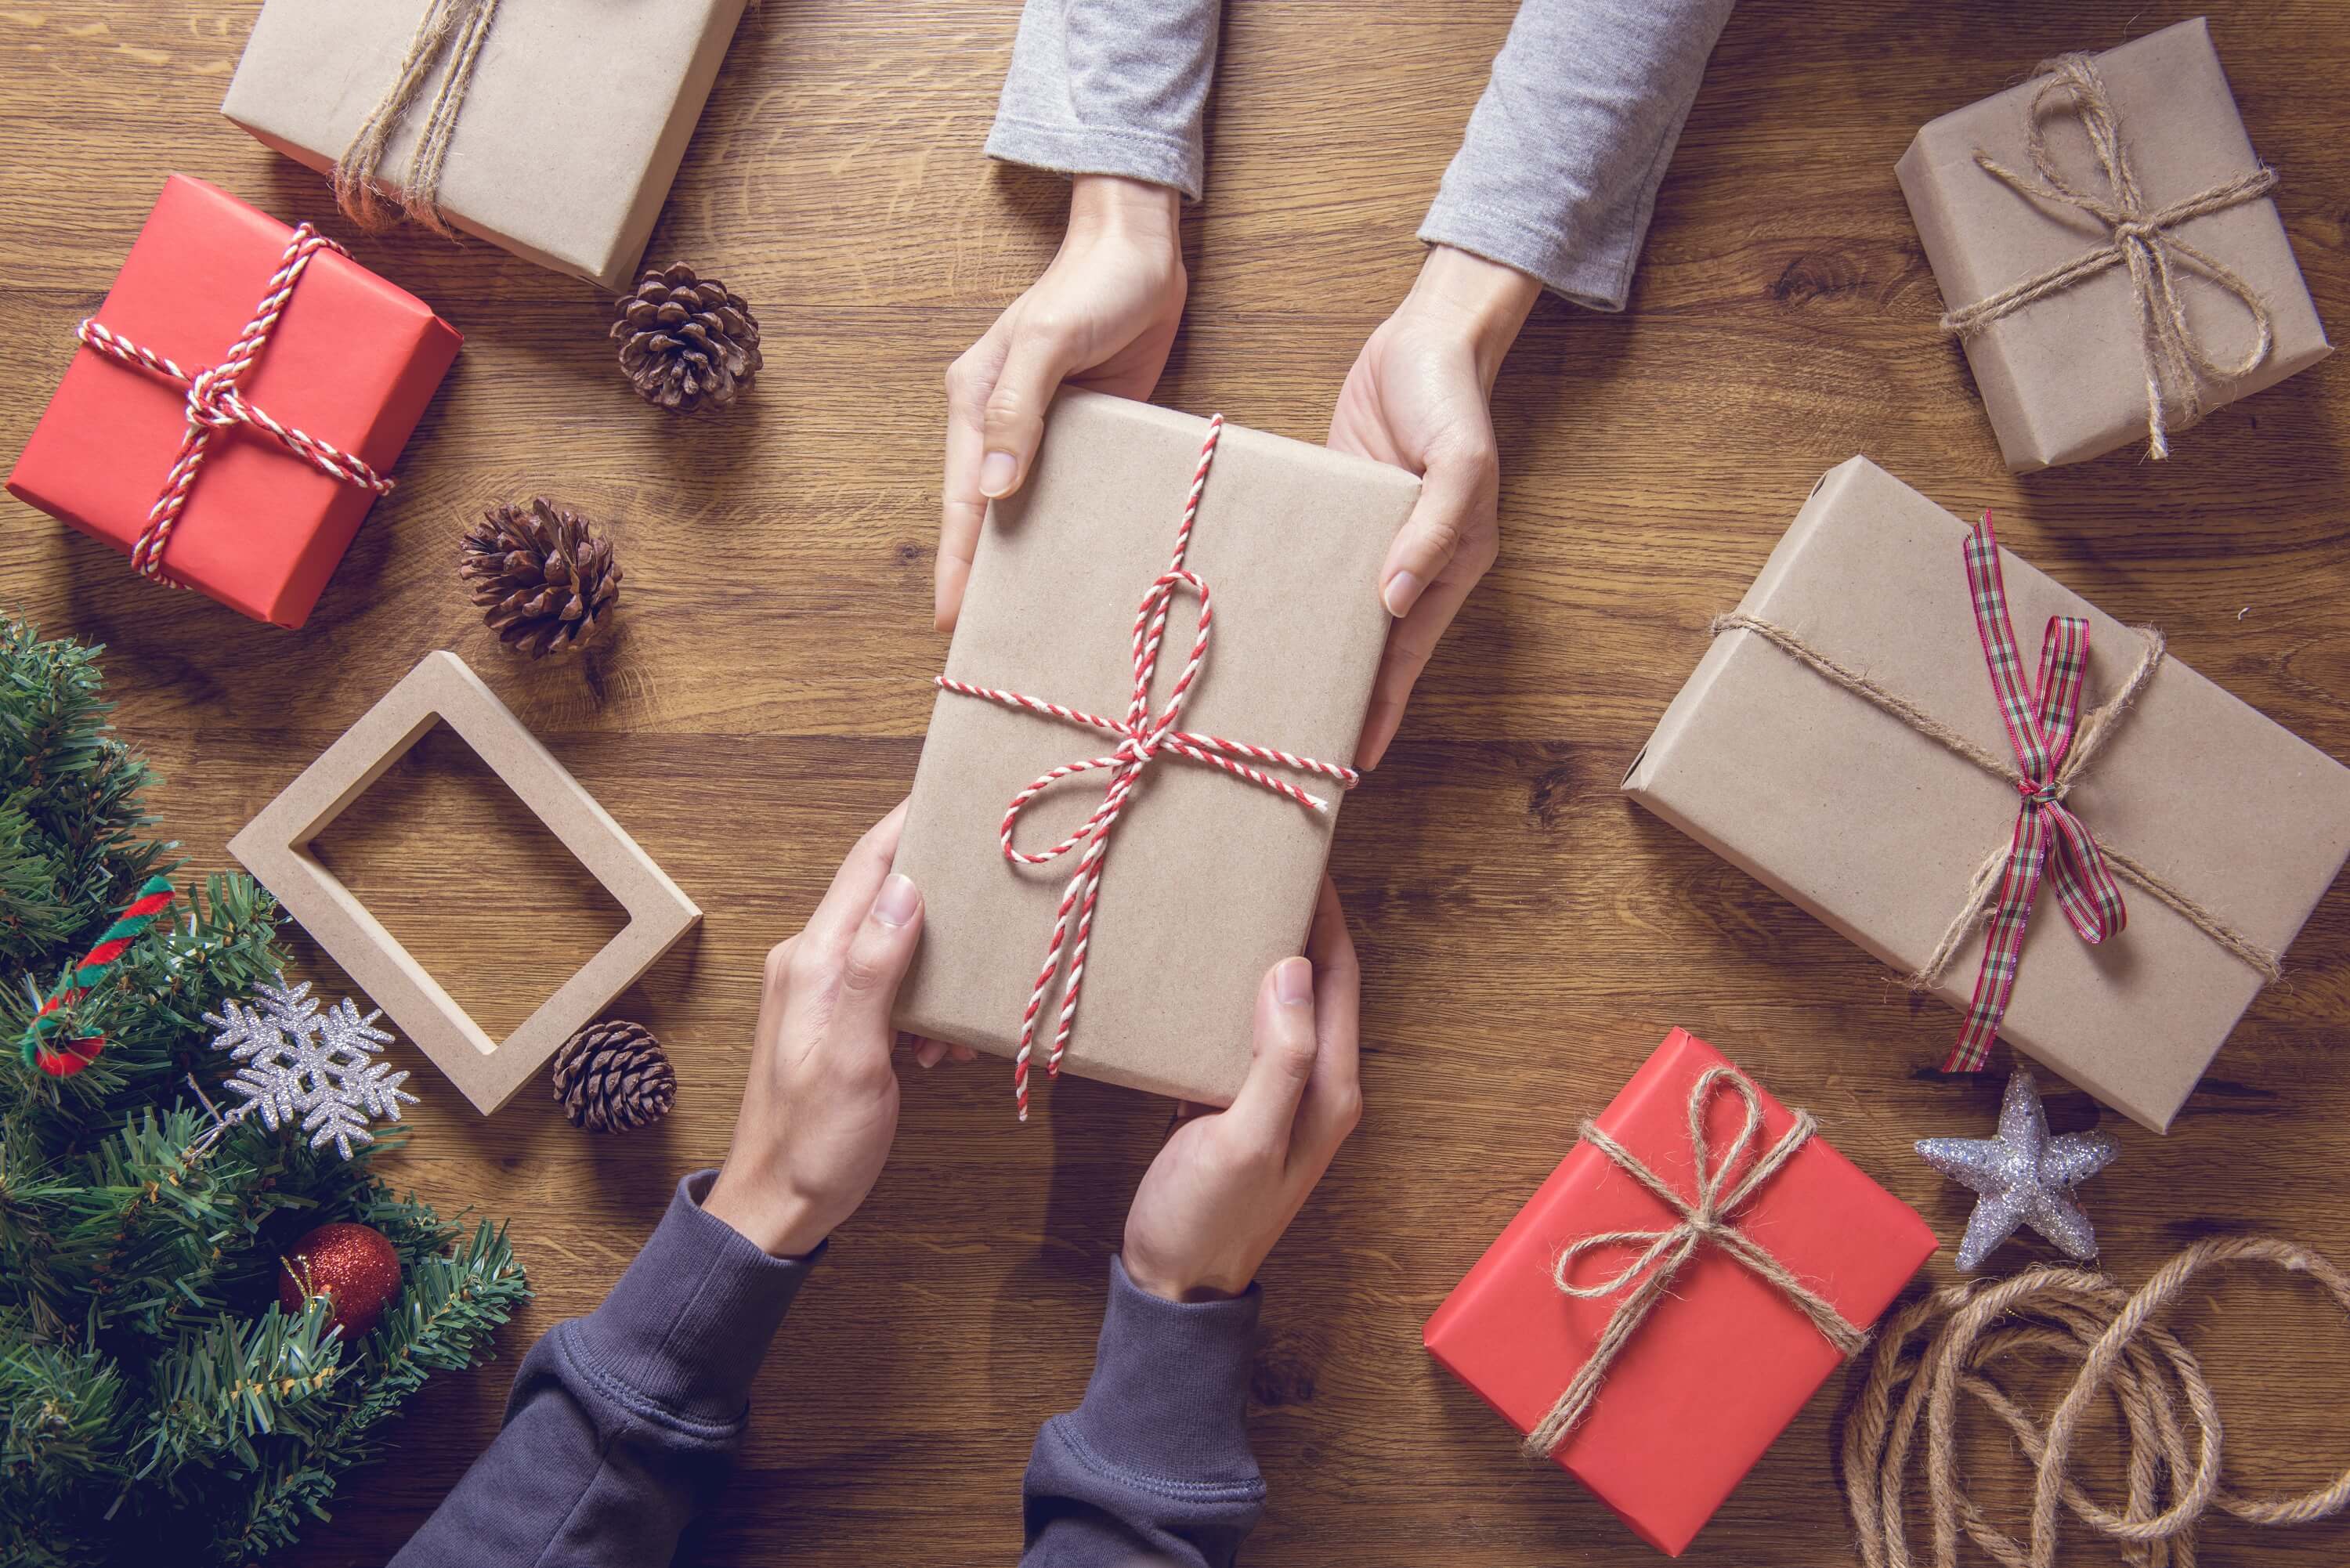 Christmas gifts that will both please and help - BoraTree